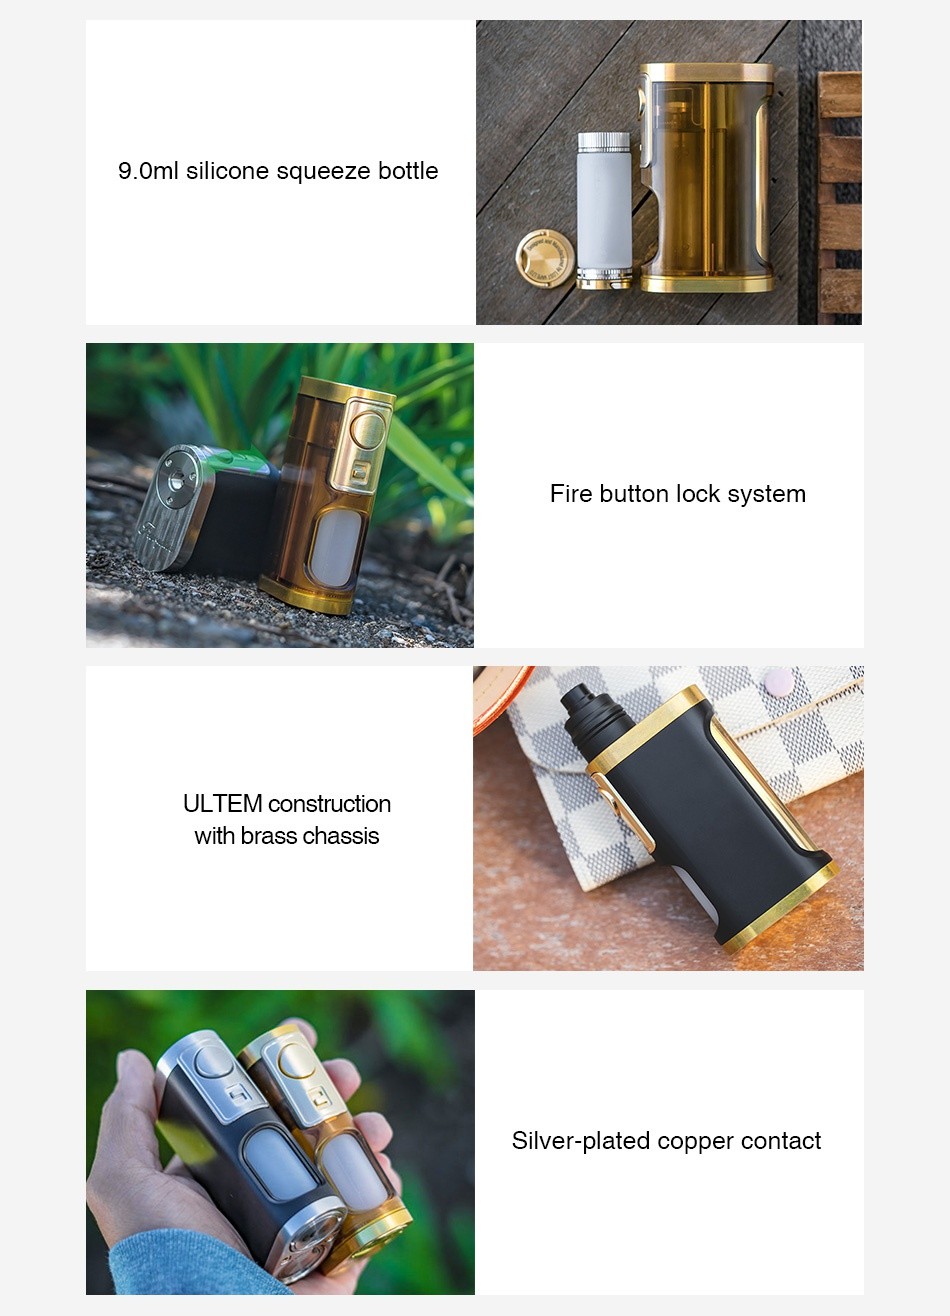 Lost Vape Furyan Mech 21700 Squonker MOD 9 oml silicone squeeze bottle Fire button lock system ULTEM construction With brass chassis Silver plated copper contact